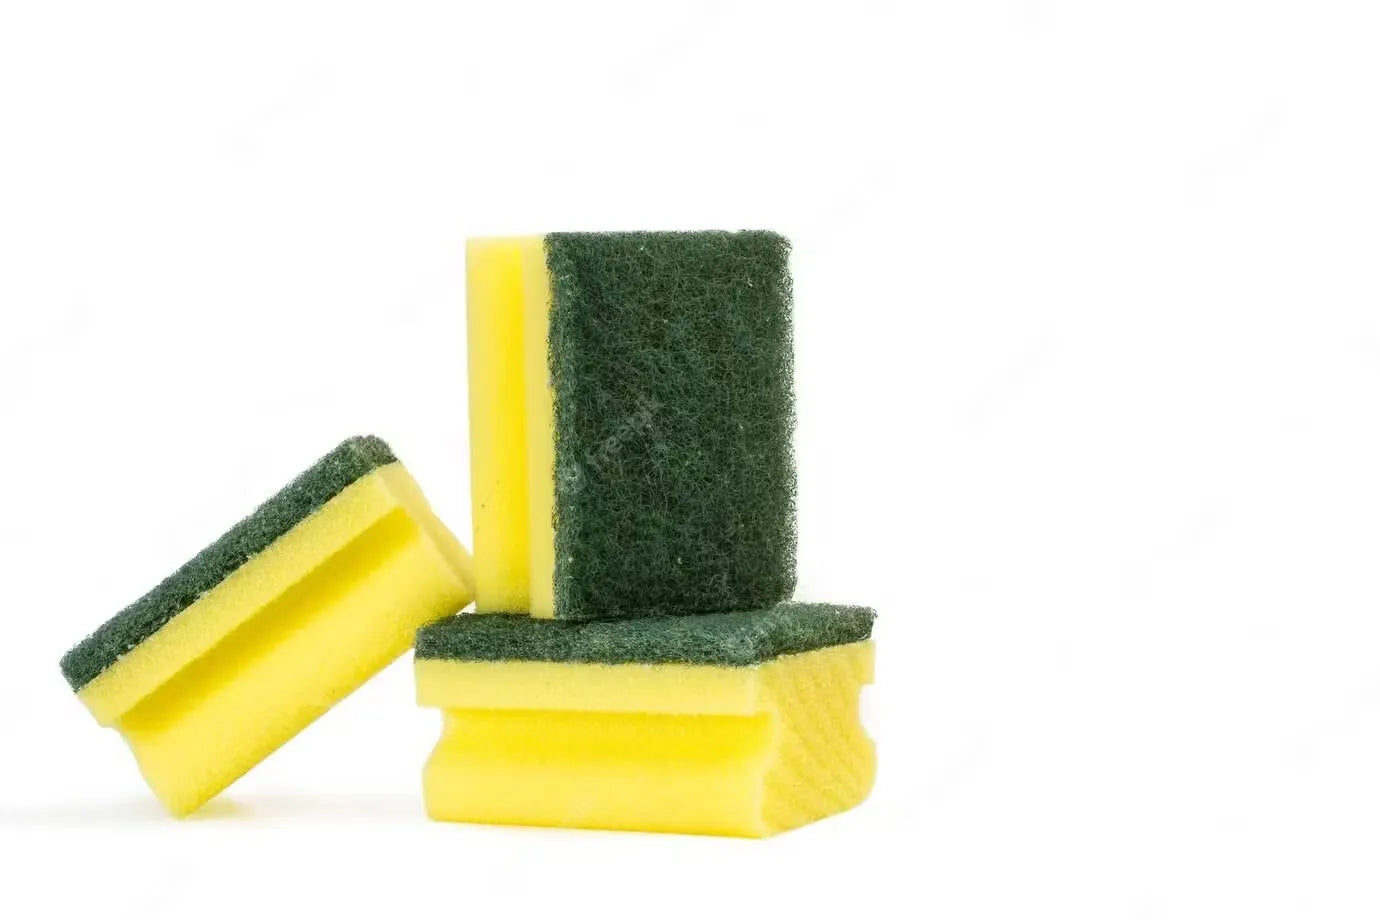 Pack of three premium quality sponge scrubbers with different colors and textures. Highlighting the soft texture and sudsy lather ideal for effortless cleaning.